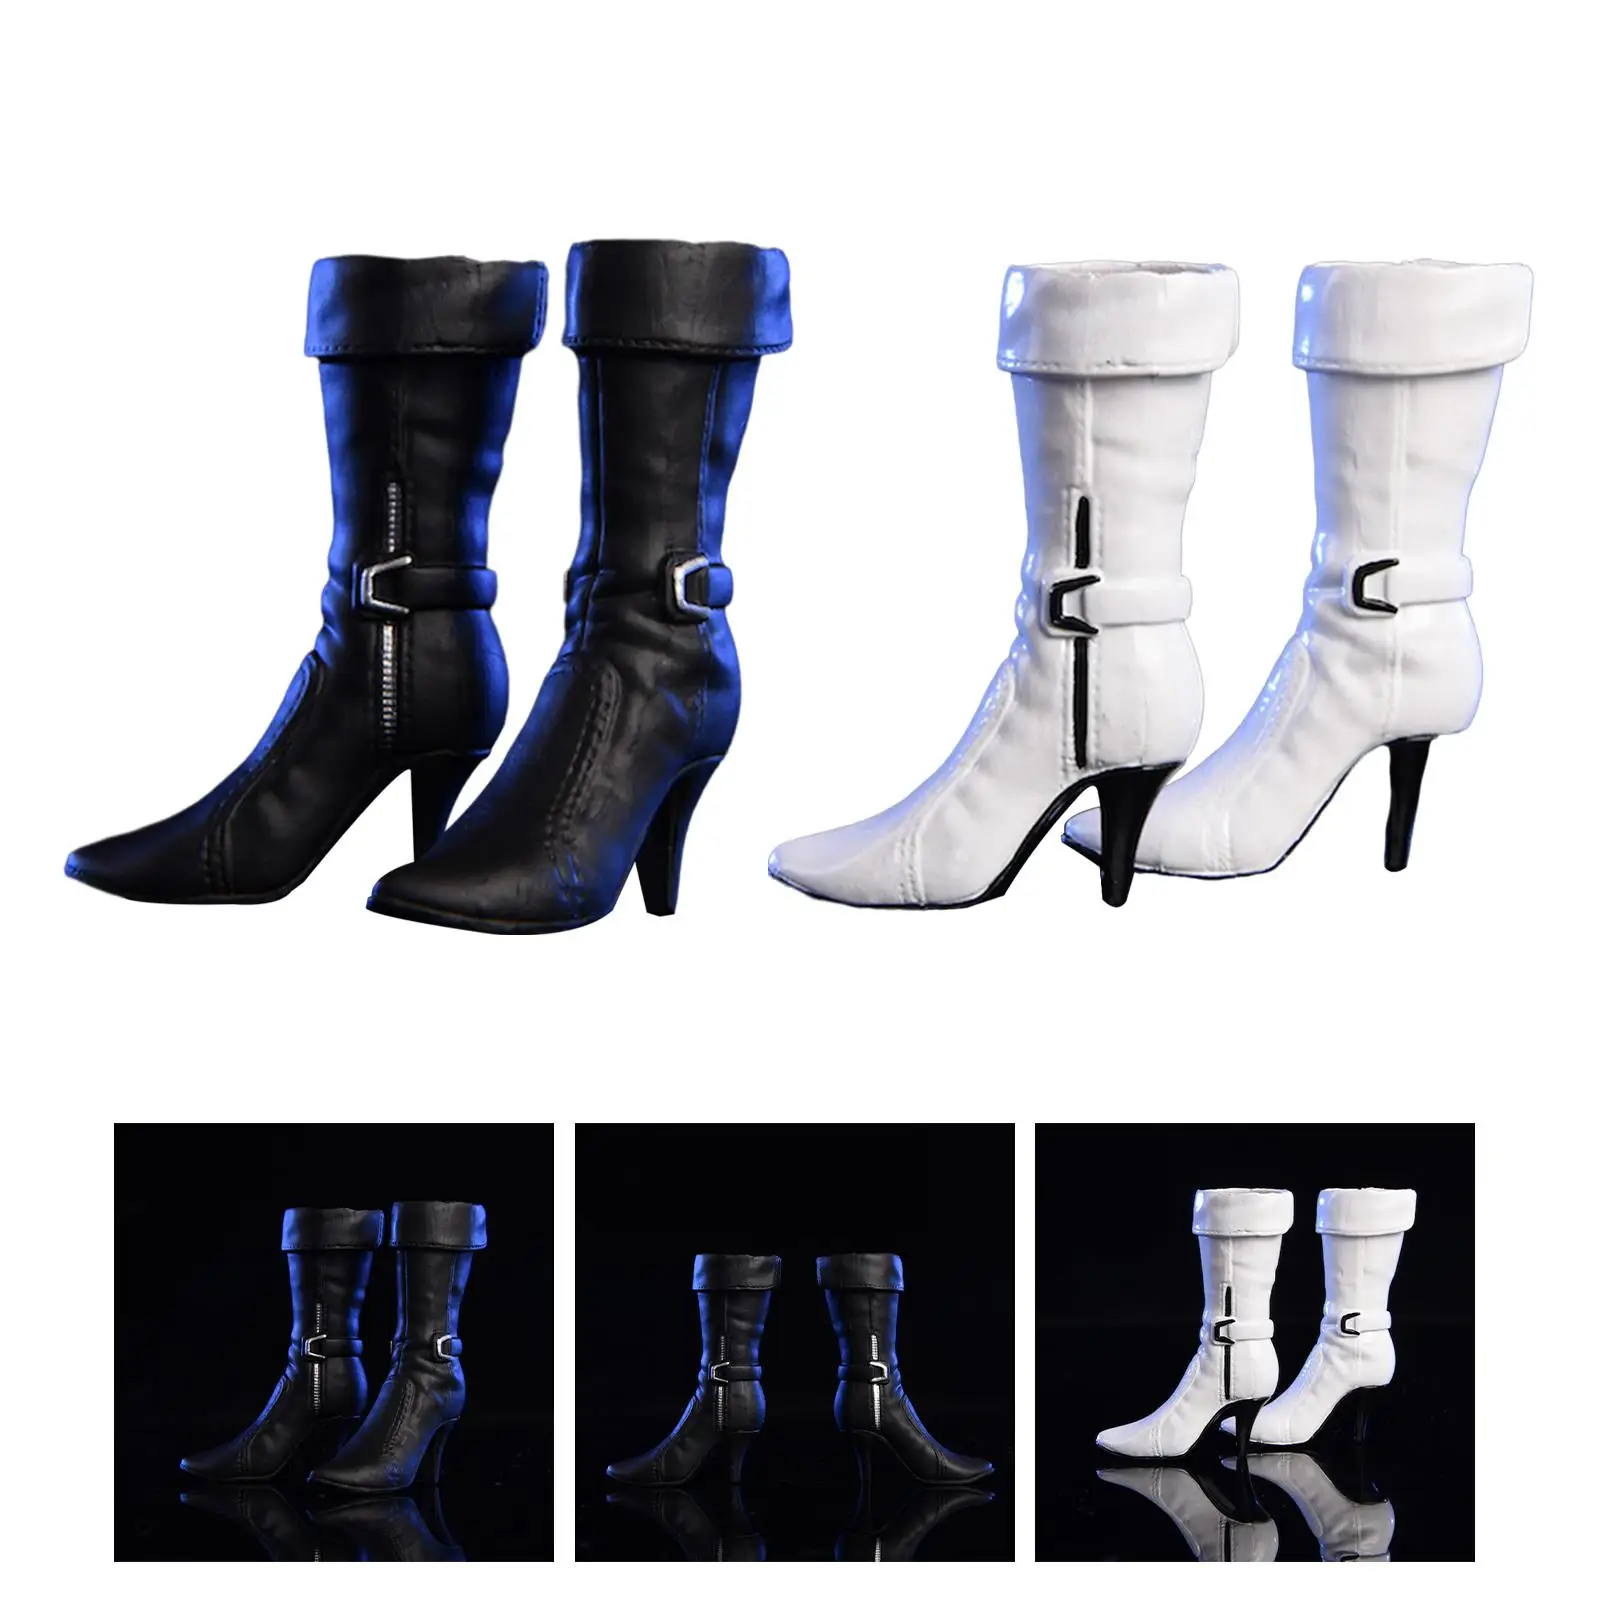 1/6 Scale Figure Shoes Handmade PU 3.5 cm Length Shoes High Heeled Shoes for 12 inch Female Action Figure Accessories